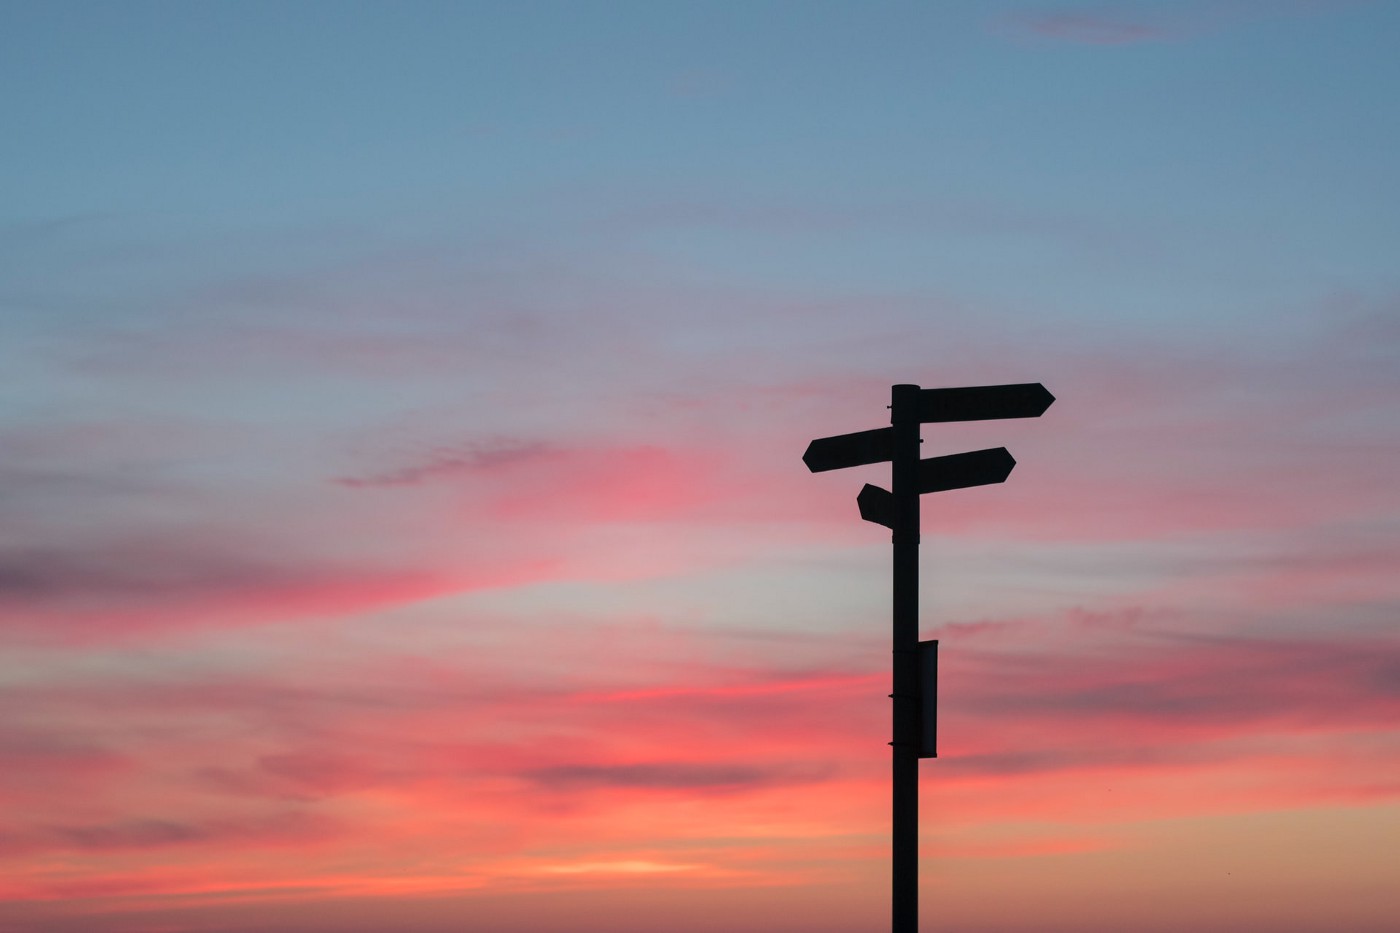 A silhouette of road signs set against a pink, orange, and blue sunset.